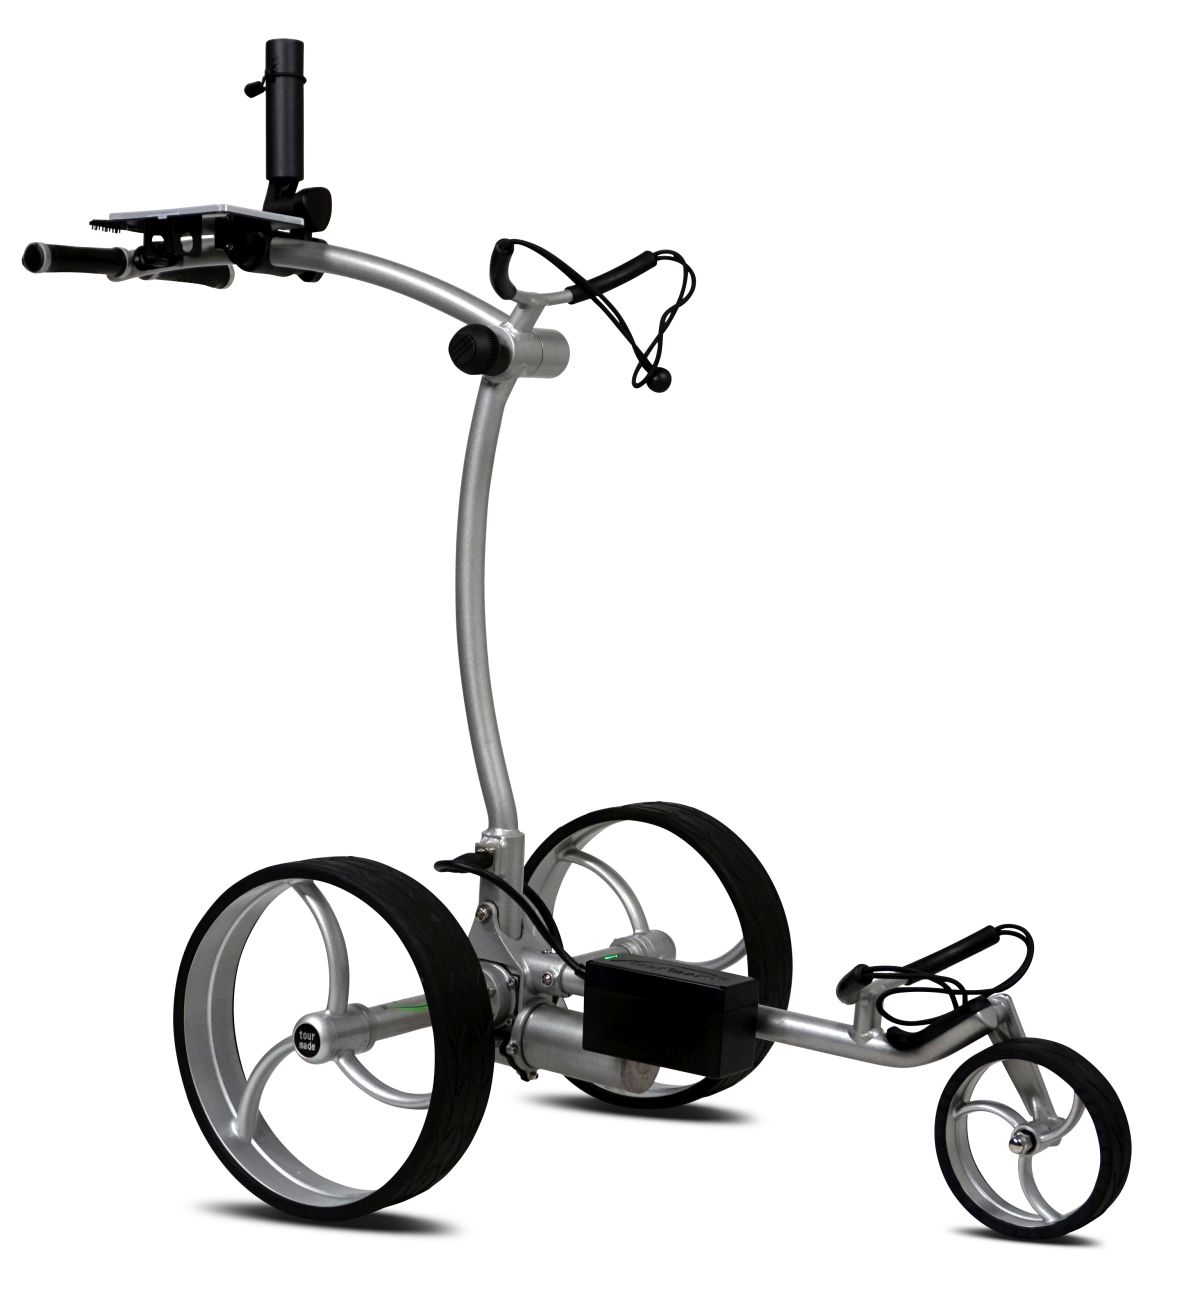 Refurbed Tour Made RT-610S electric golf trolley silver-silver